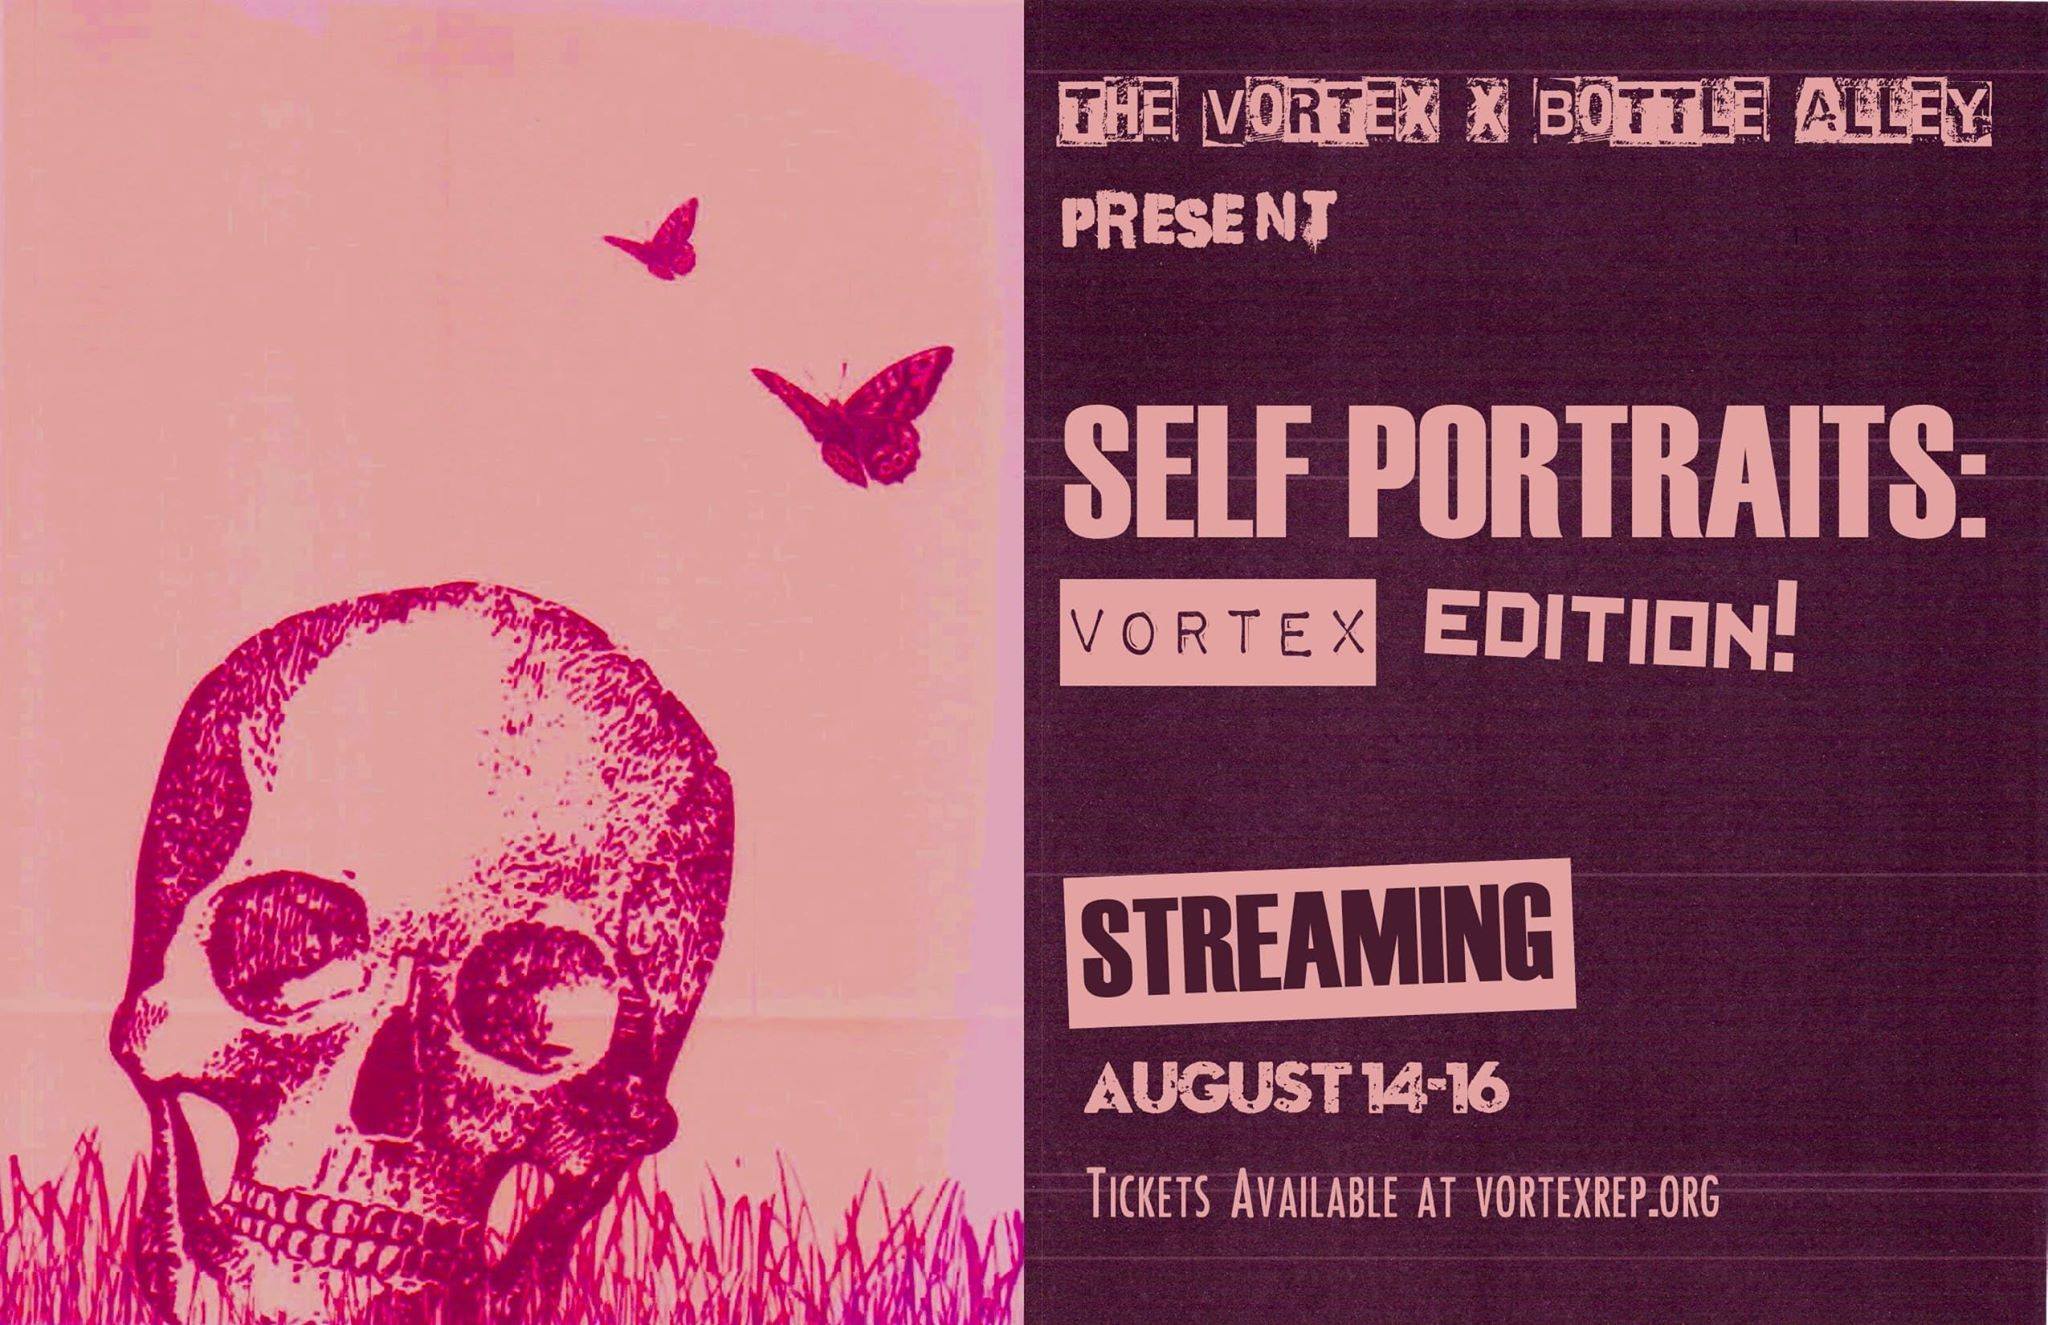 Self Portraits - Vortex Edition by Bottle Alley Theatre Company